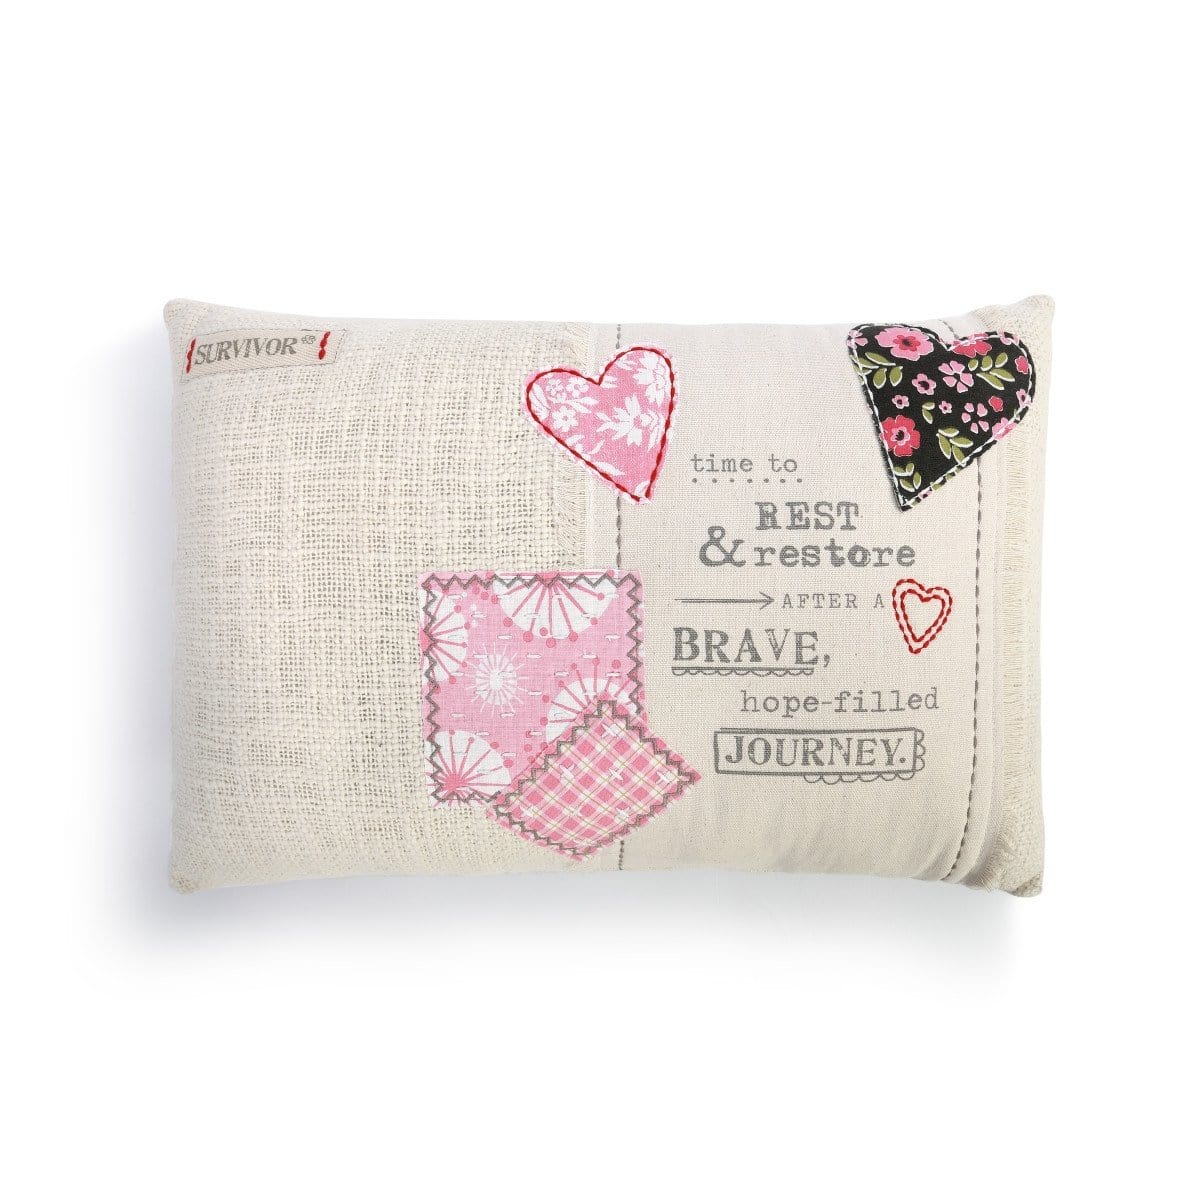 "Survivor" Pillow and Plush Throw Blanket, Beautiful Gift for the Survivors in your Life by Kelly Rae Roberts - The Pink Pigs, A Compassionate Boutique